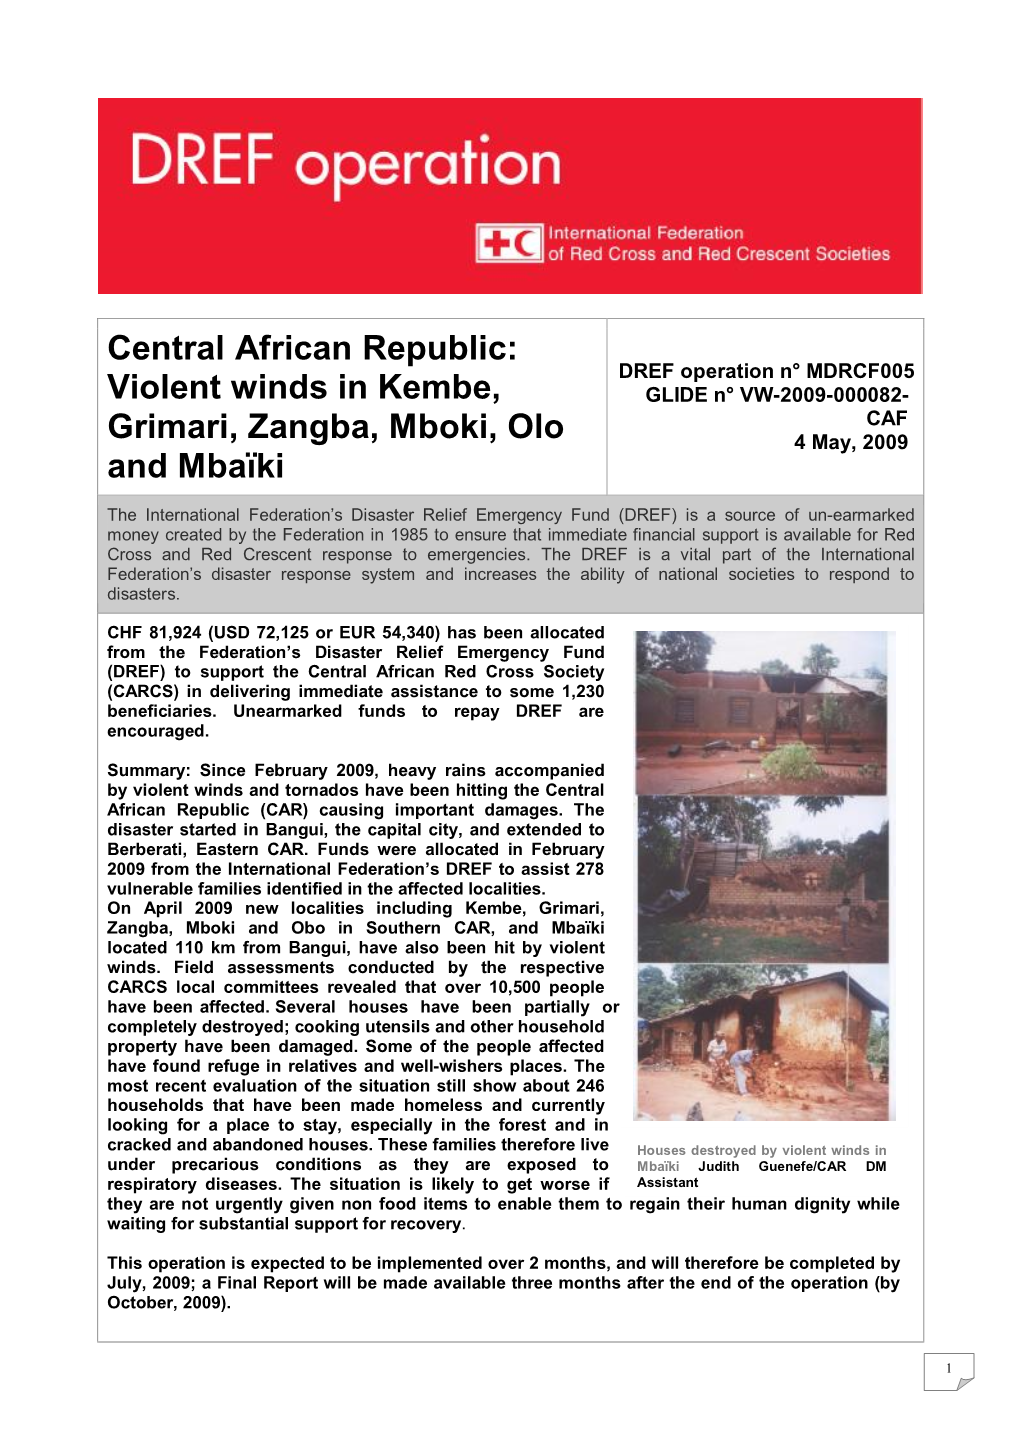 Central African Republic: DREF Operation N° MDRCF005 Violent Winds in Kembe, GLIDE N° VW-2009-000082- CAF Grimari, Zangba, Mboki, Olo 4 May, 2009 and Mbaïki